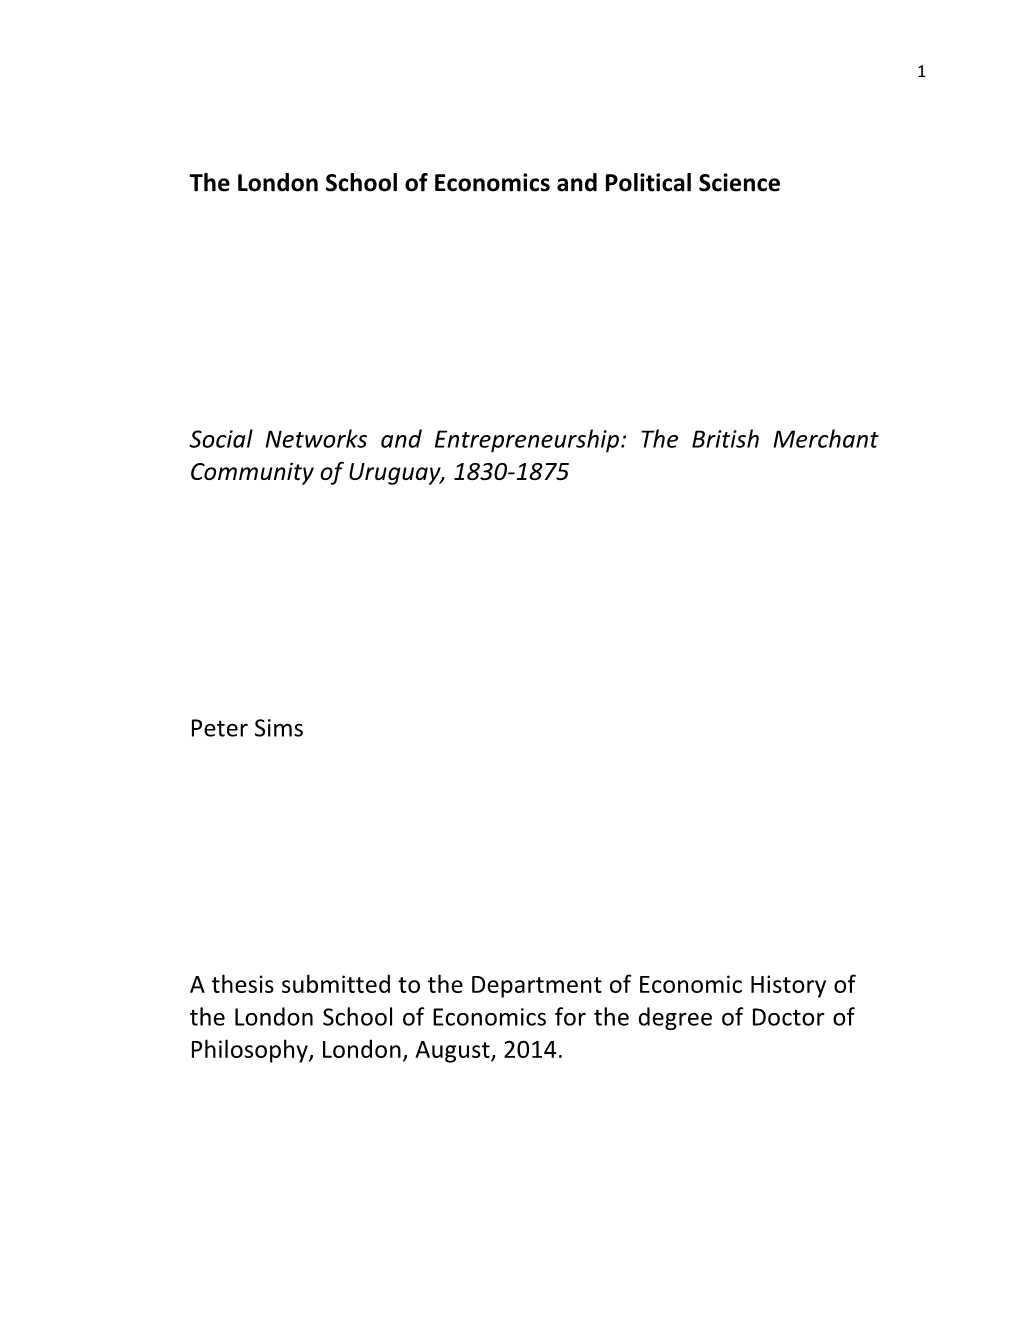 The London School of Economics and Political Science Social Networks